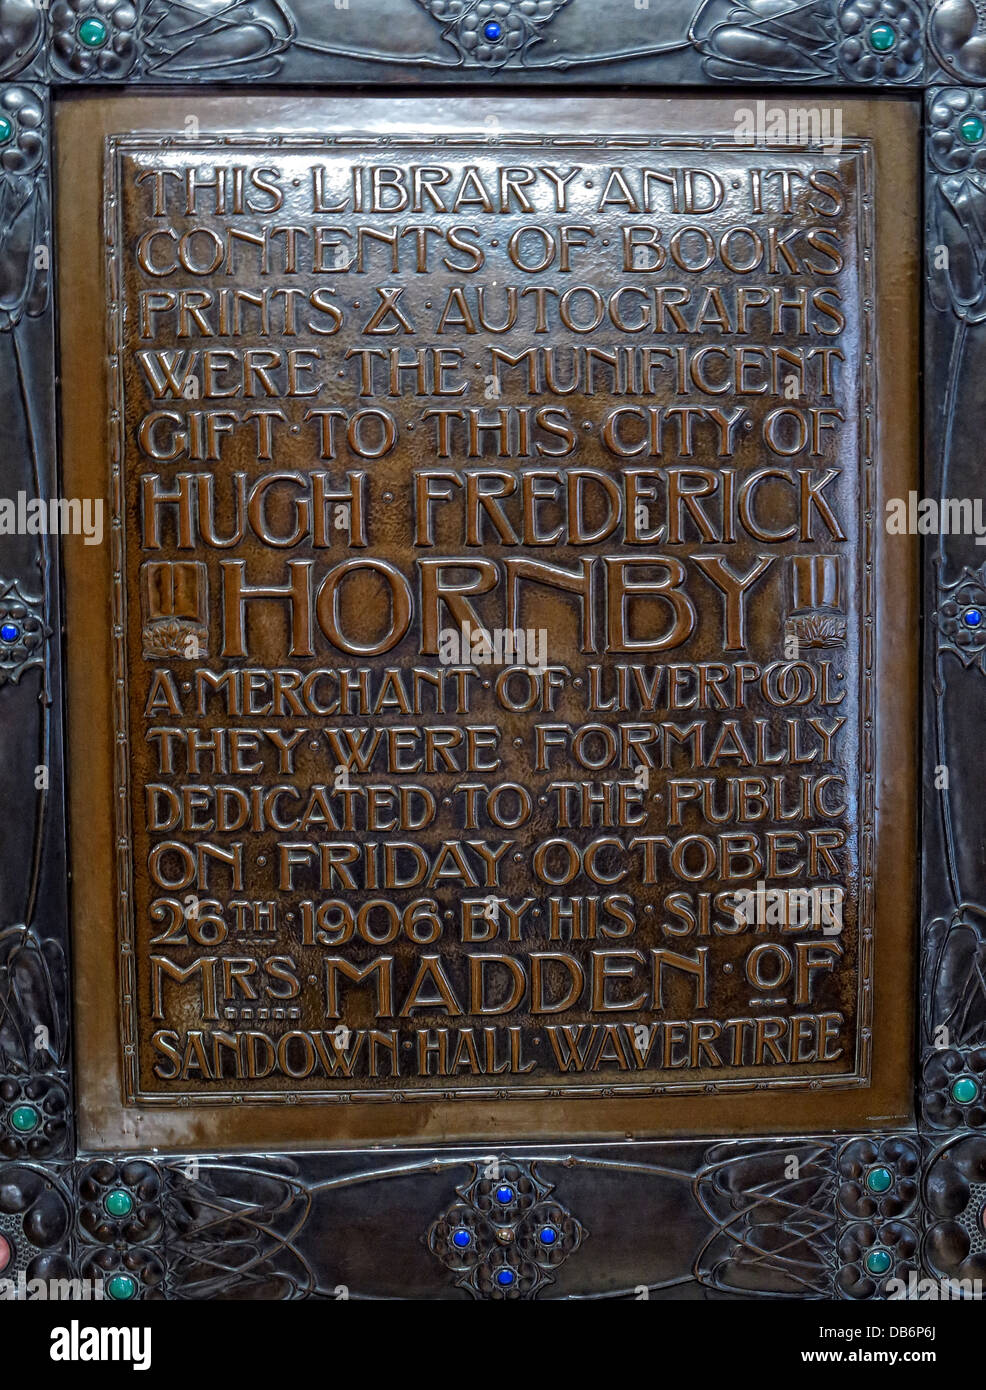 Liverpool Central Library - plaque commemorating gift of books, prints, autographs,from Hugh Frederick Hornby, a merchant of the city 1906 Stock Photo